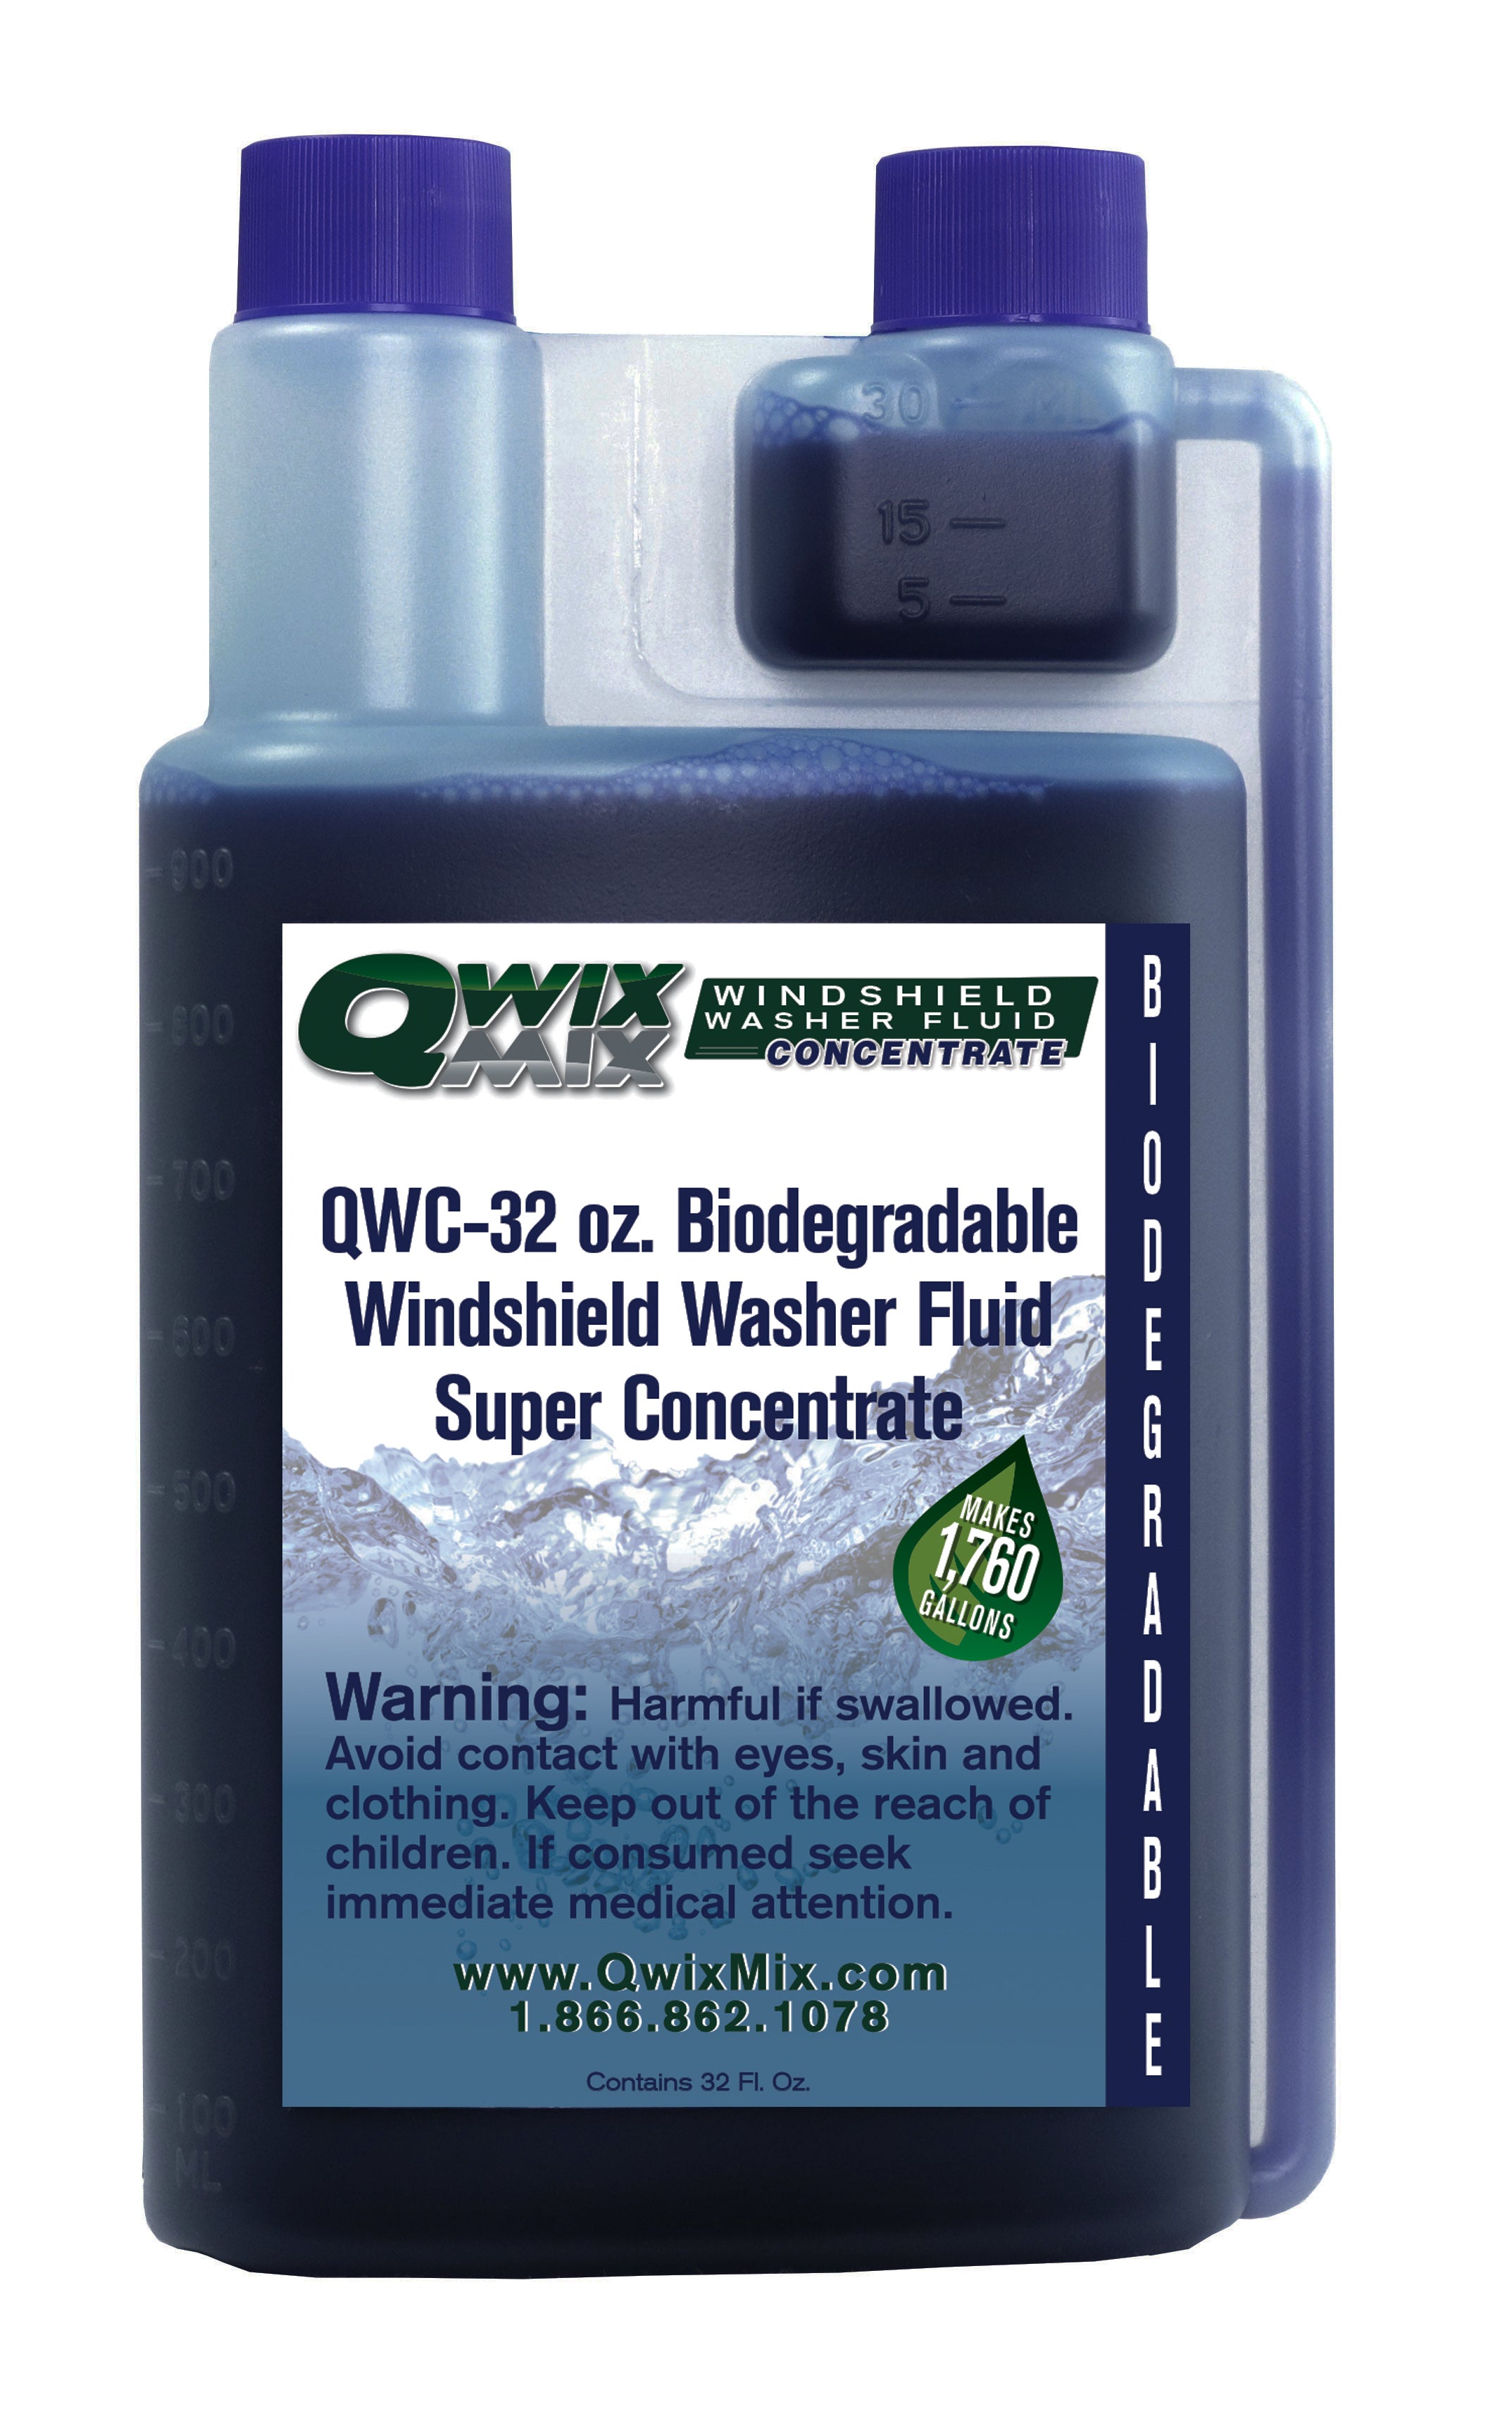 8 oz Squeeze Bottle of Windshield Washer Fluid Concentrate – Qwix Mix